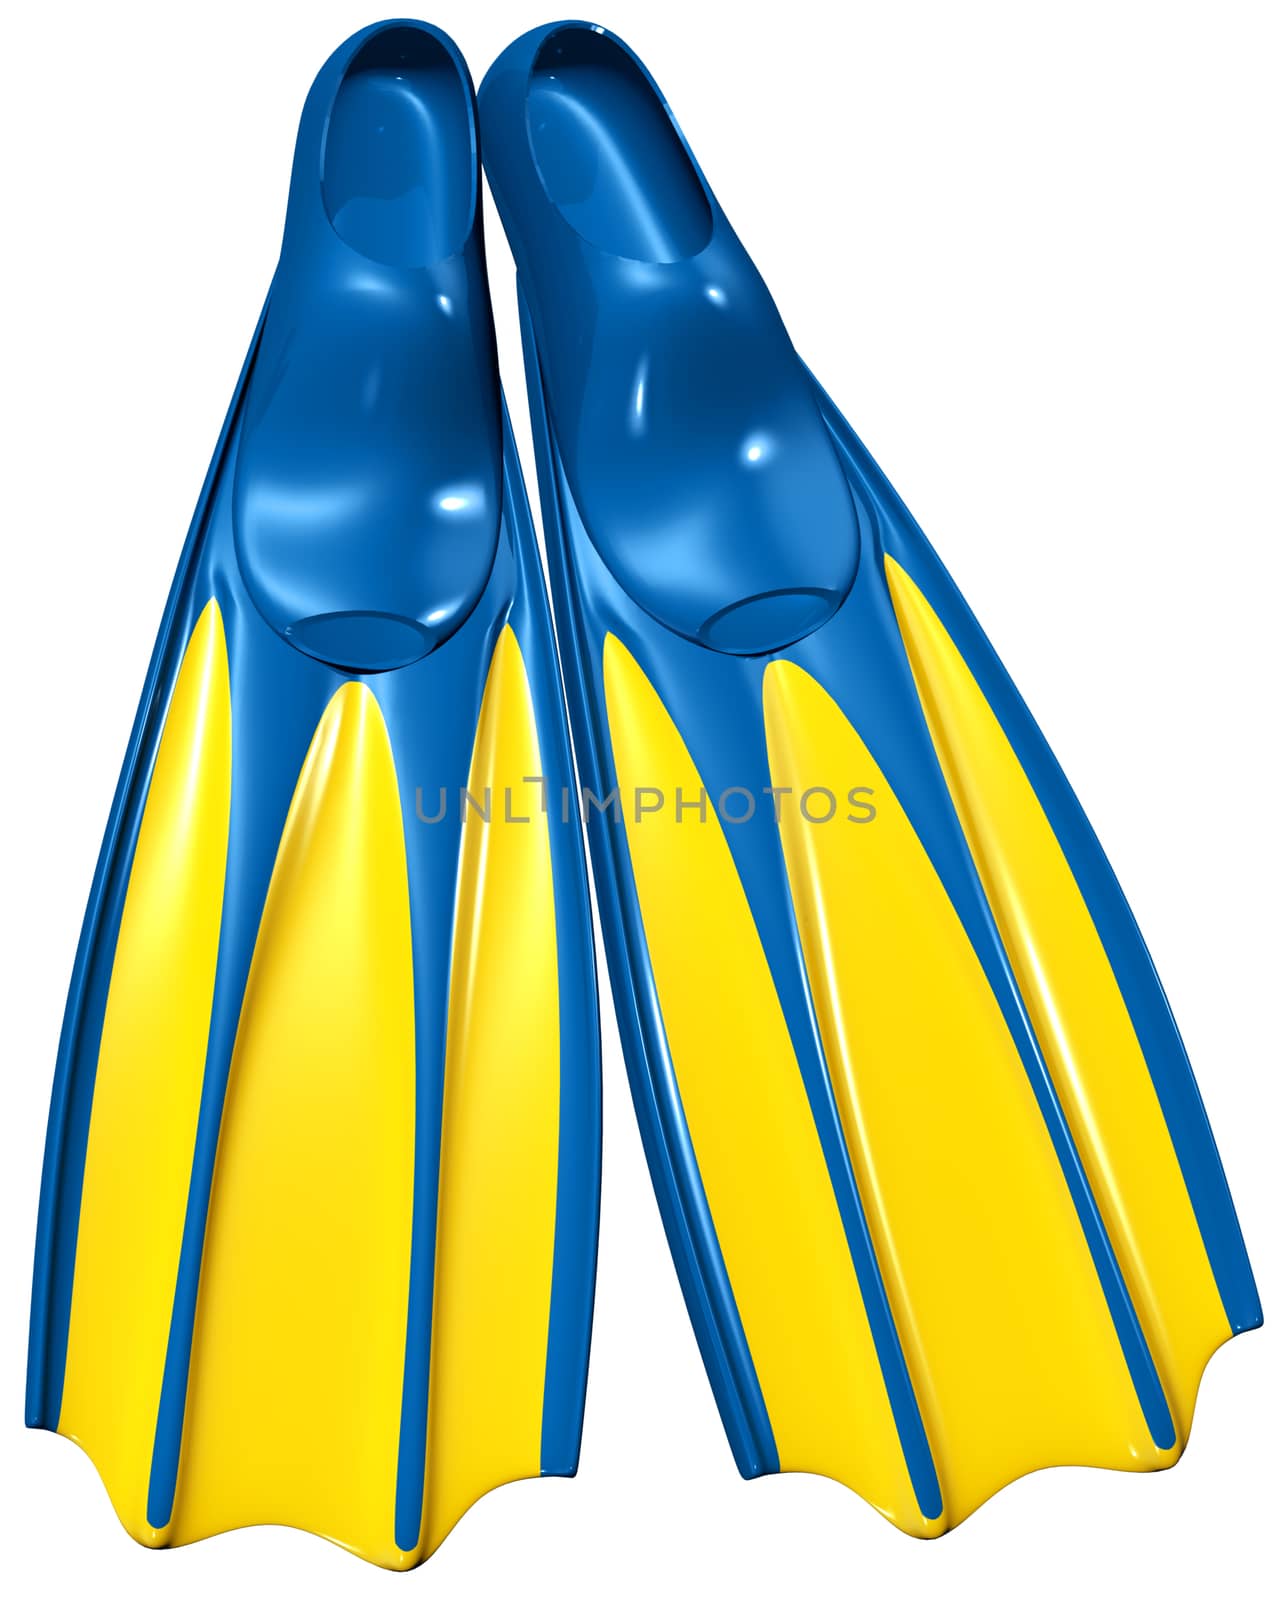 swim fins with blue rubber and yellow plastic by merzavka